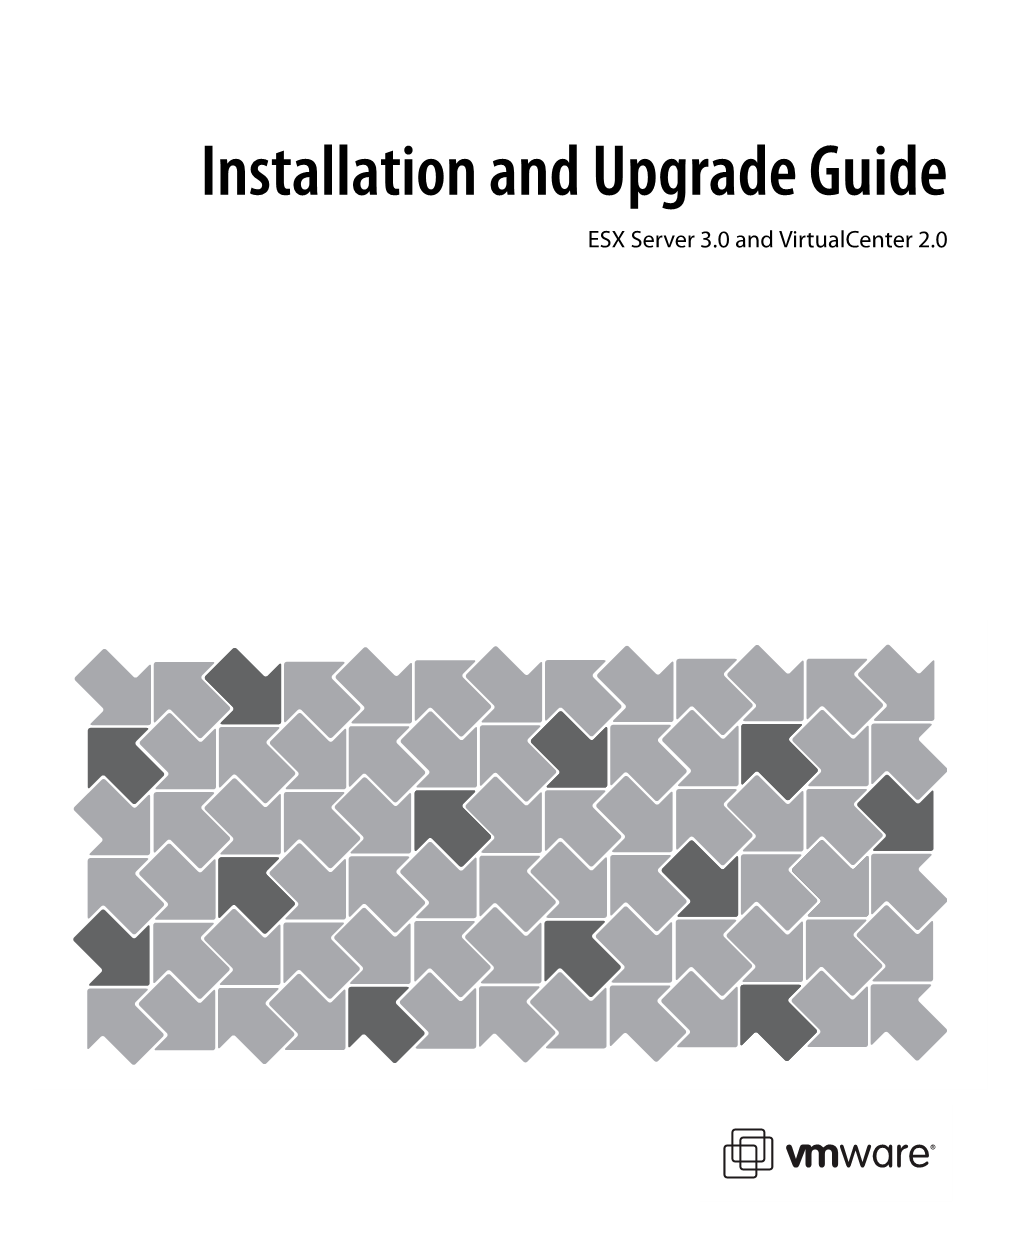 Vmware Infrastructure Installation and Upgrade Guide